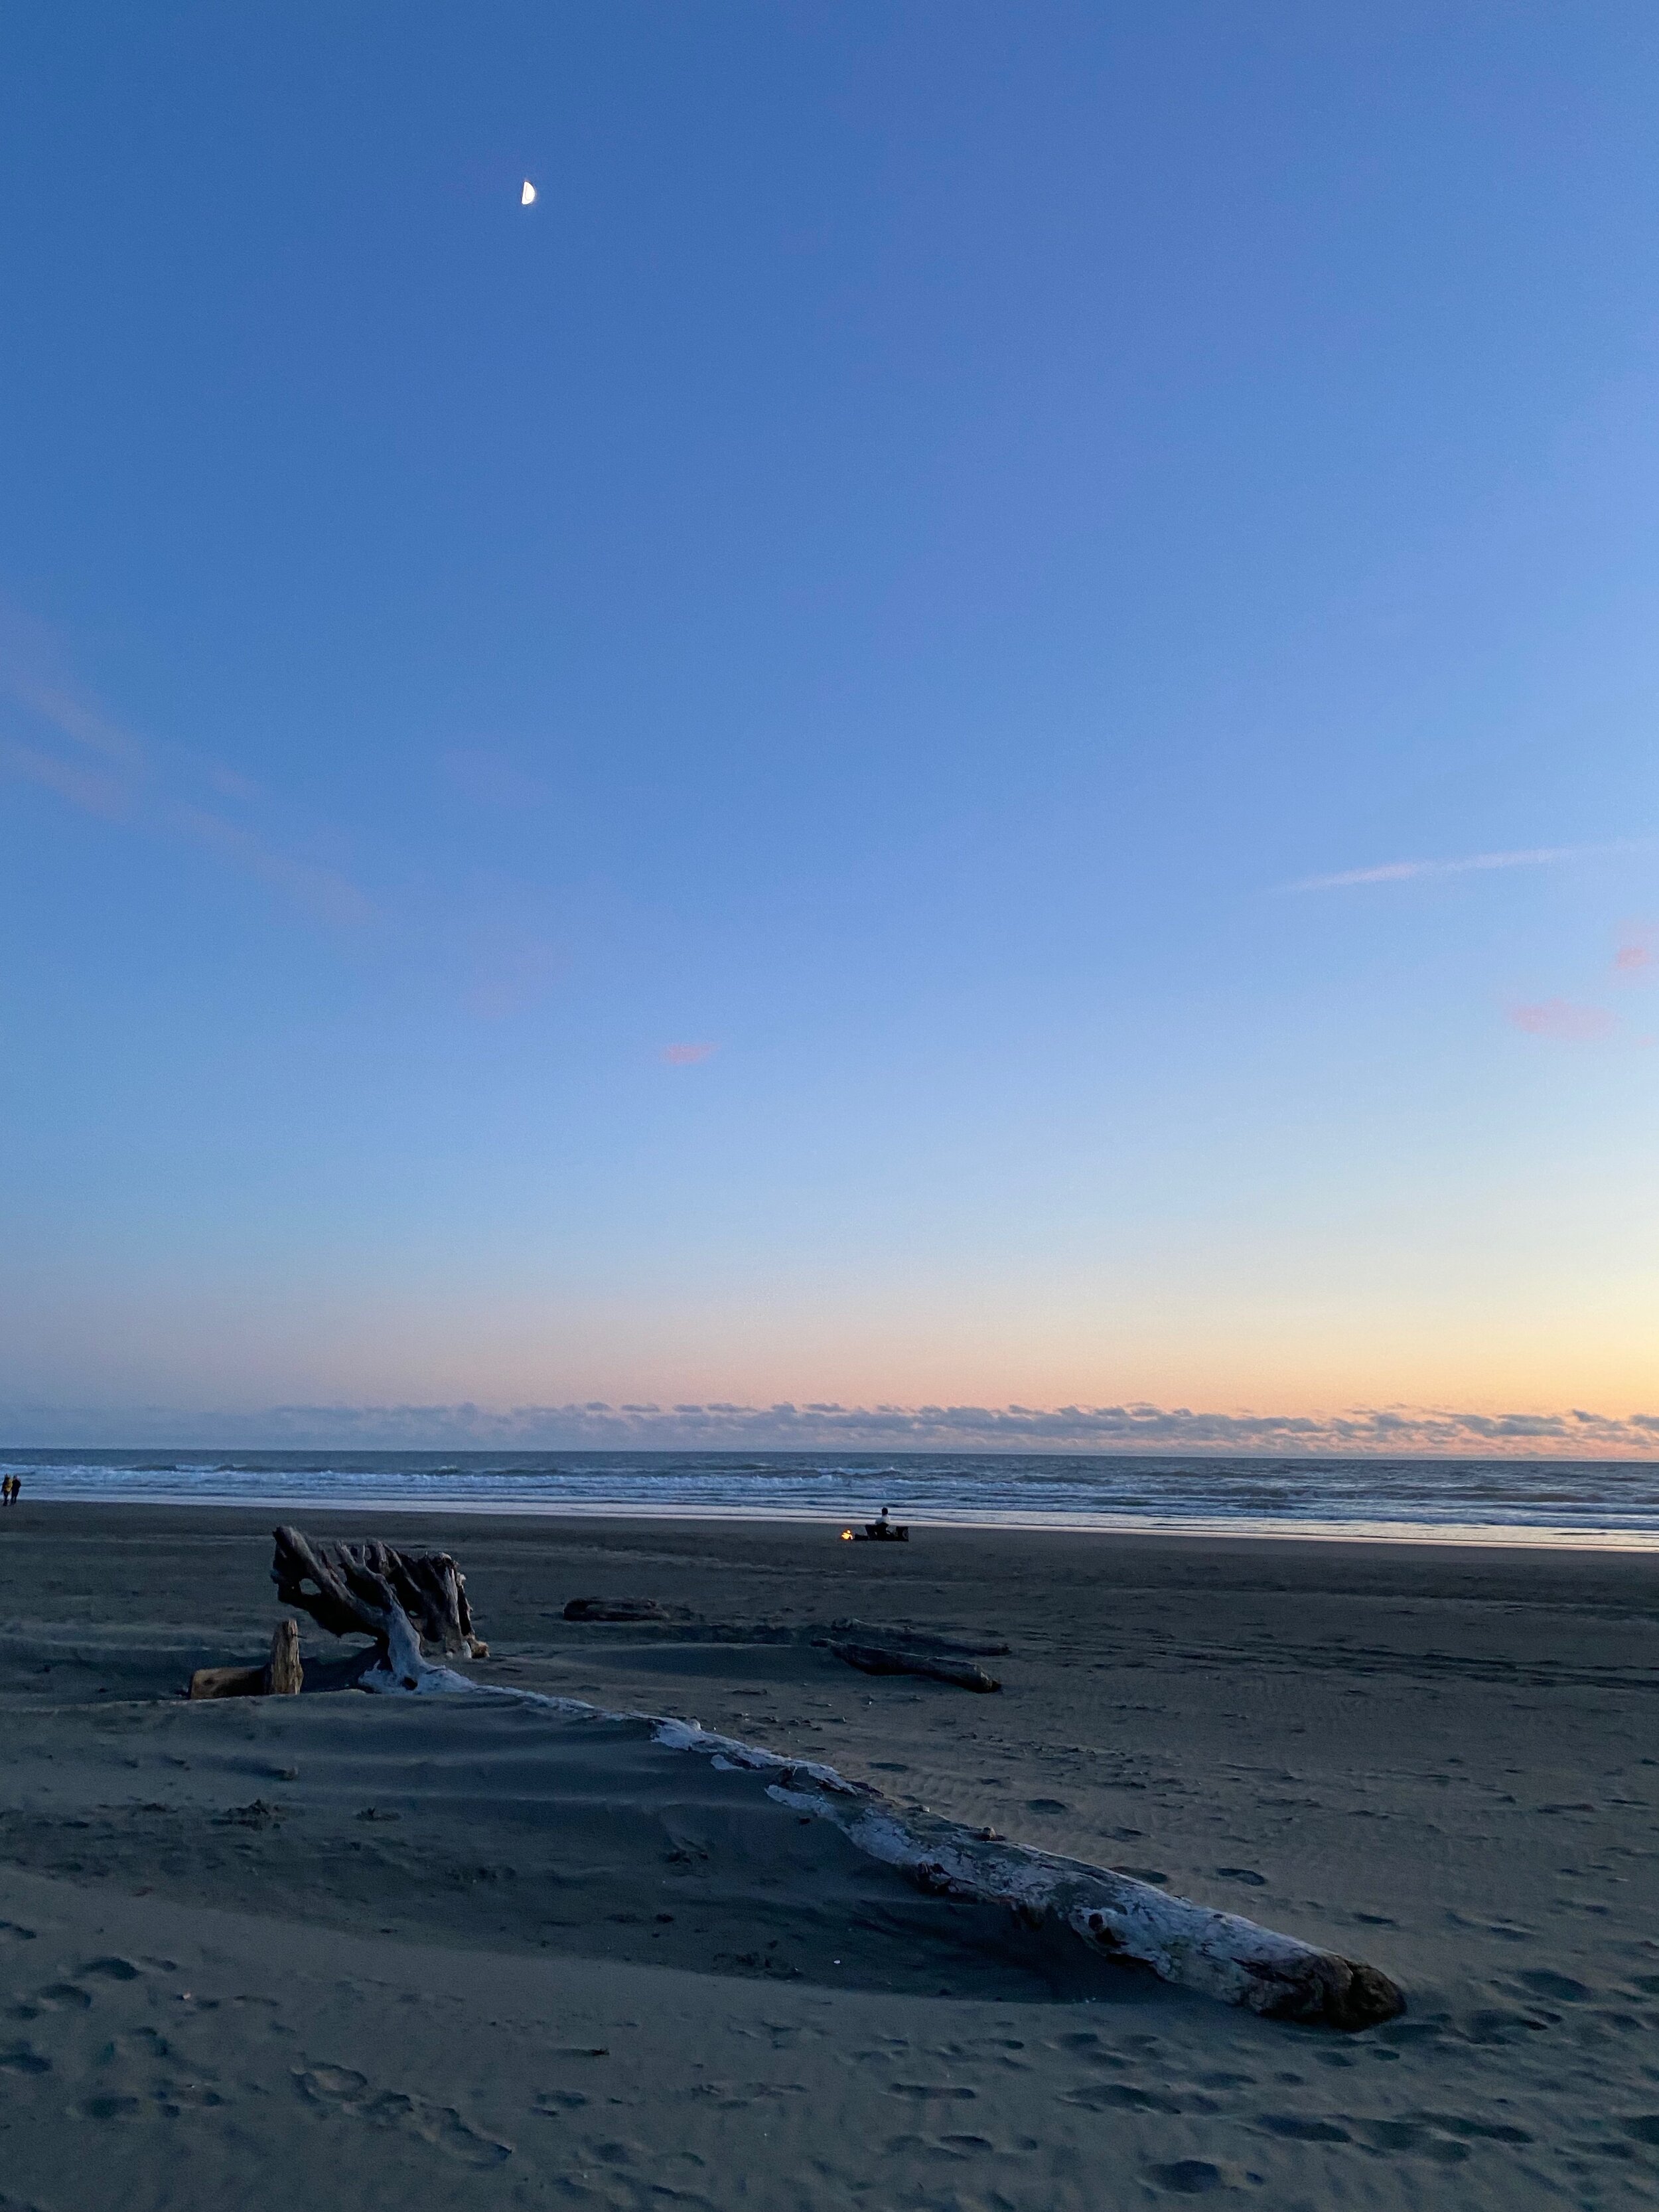 The moon over Kalaloch Beach as the sun sets and our bonfire continues.  A great downed tree turned driftwood in the foreground looks pretty steady as it slowly gets buried in the sand.  